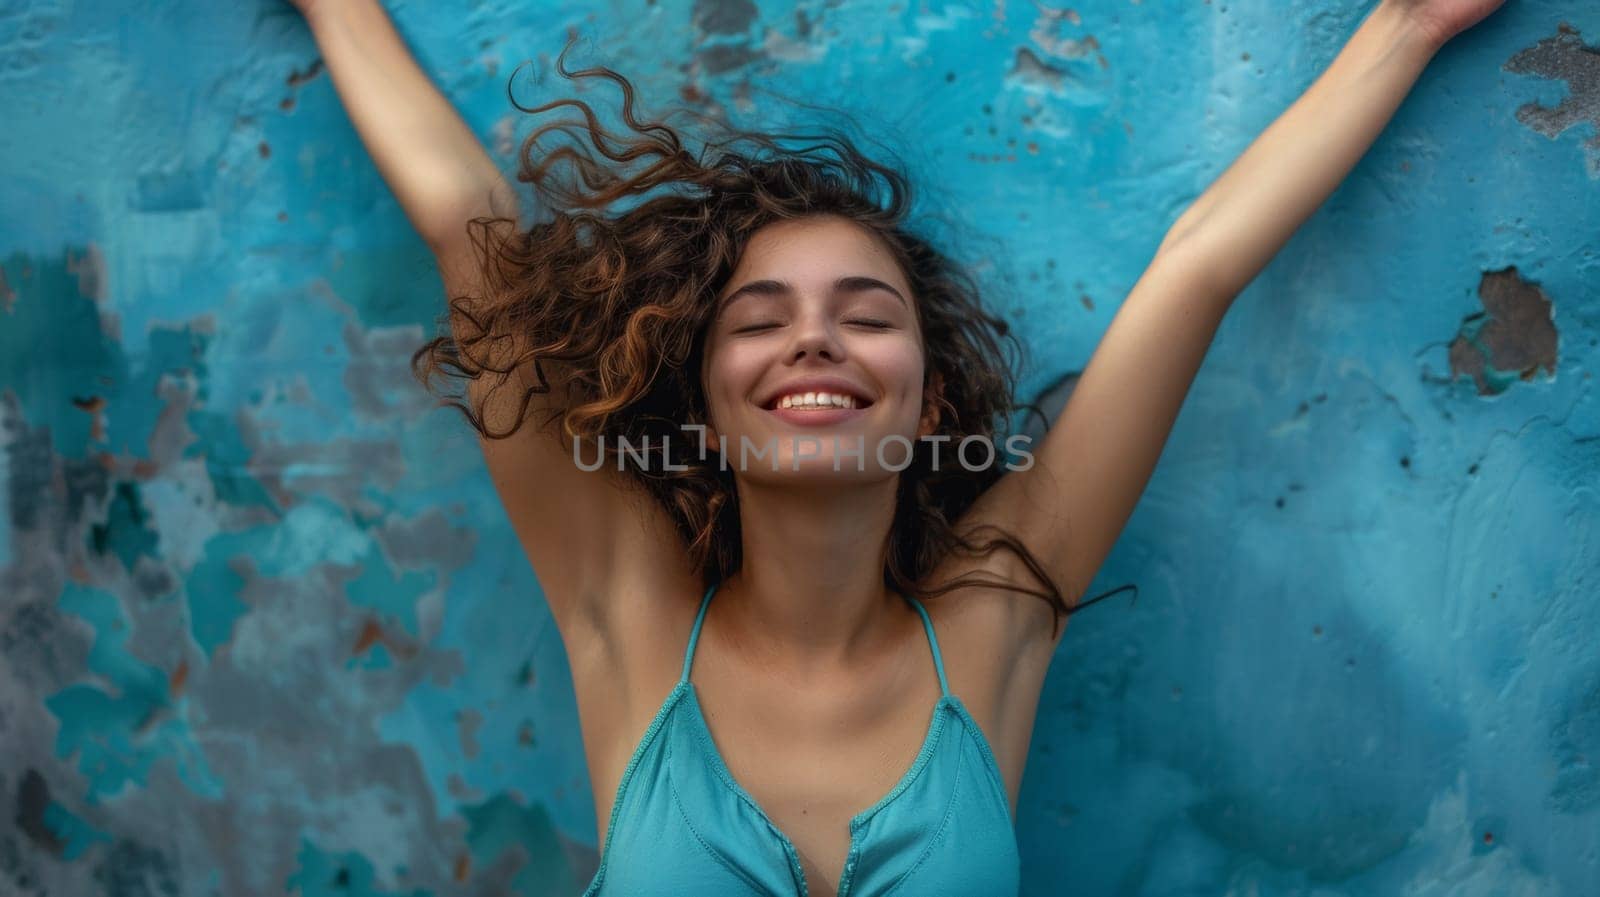 A woman in a blue bikini smiling with her arms outstretched